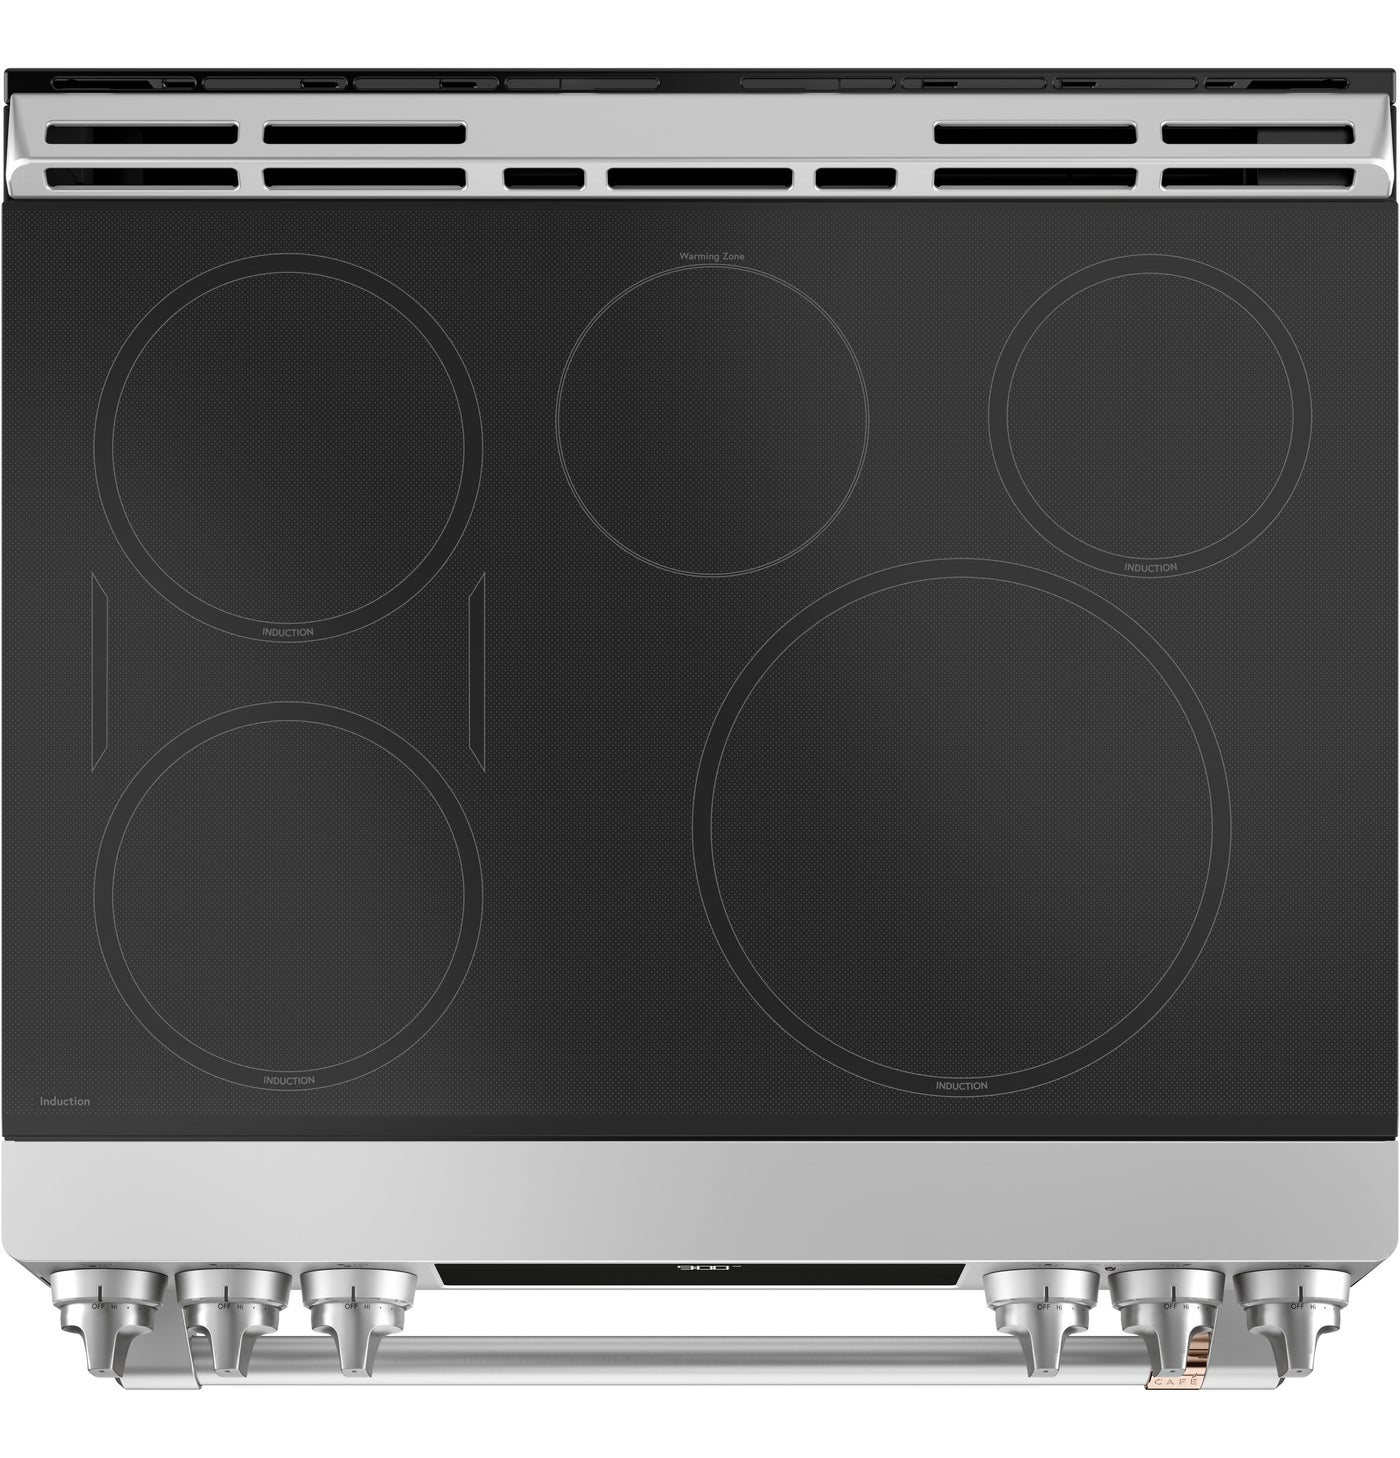 Café™ Stainless Steel 30" Slide-In Front Control Induction and Convection Range with Warming Drawer (5.7 Cu.Ft) - CCHS900P2MS1